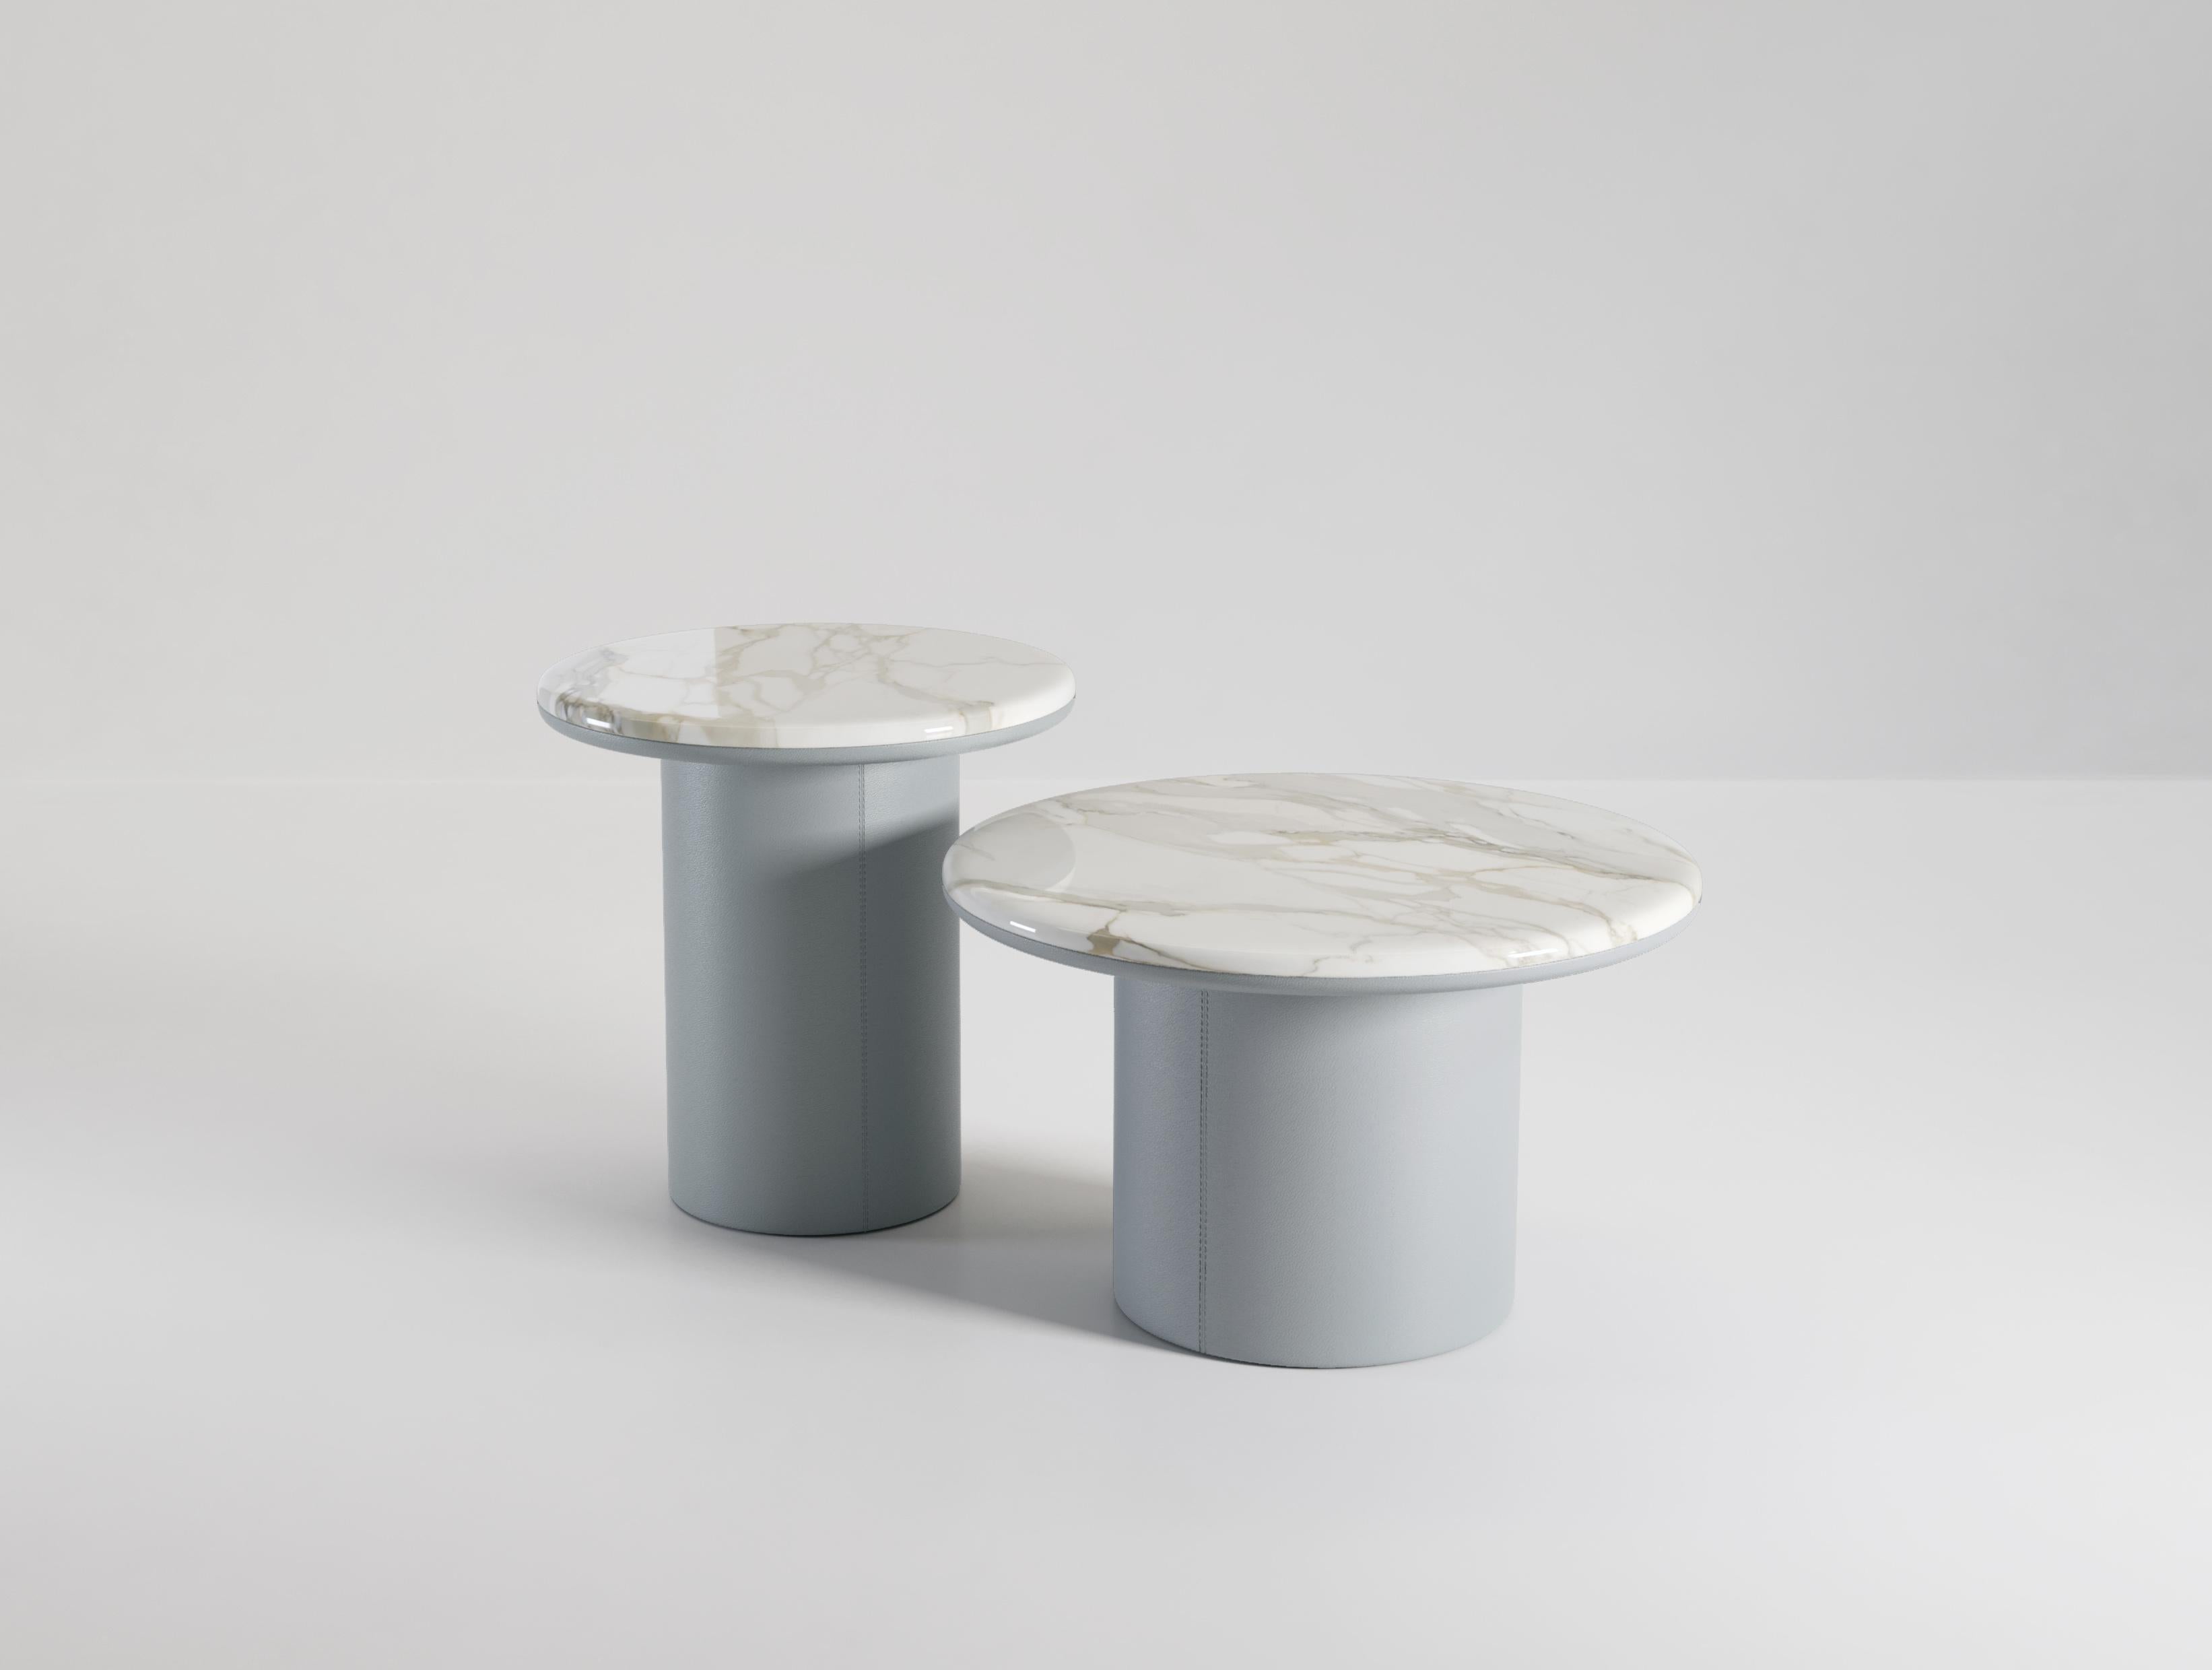 The Gemini coffee tables are characterised by the combination of materials on the top and bottom of the table. Leather wraps around the entire base and even continues up the underside of the table top. Half way around the top the leather stops and